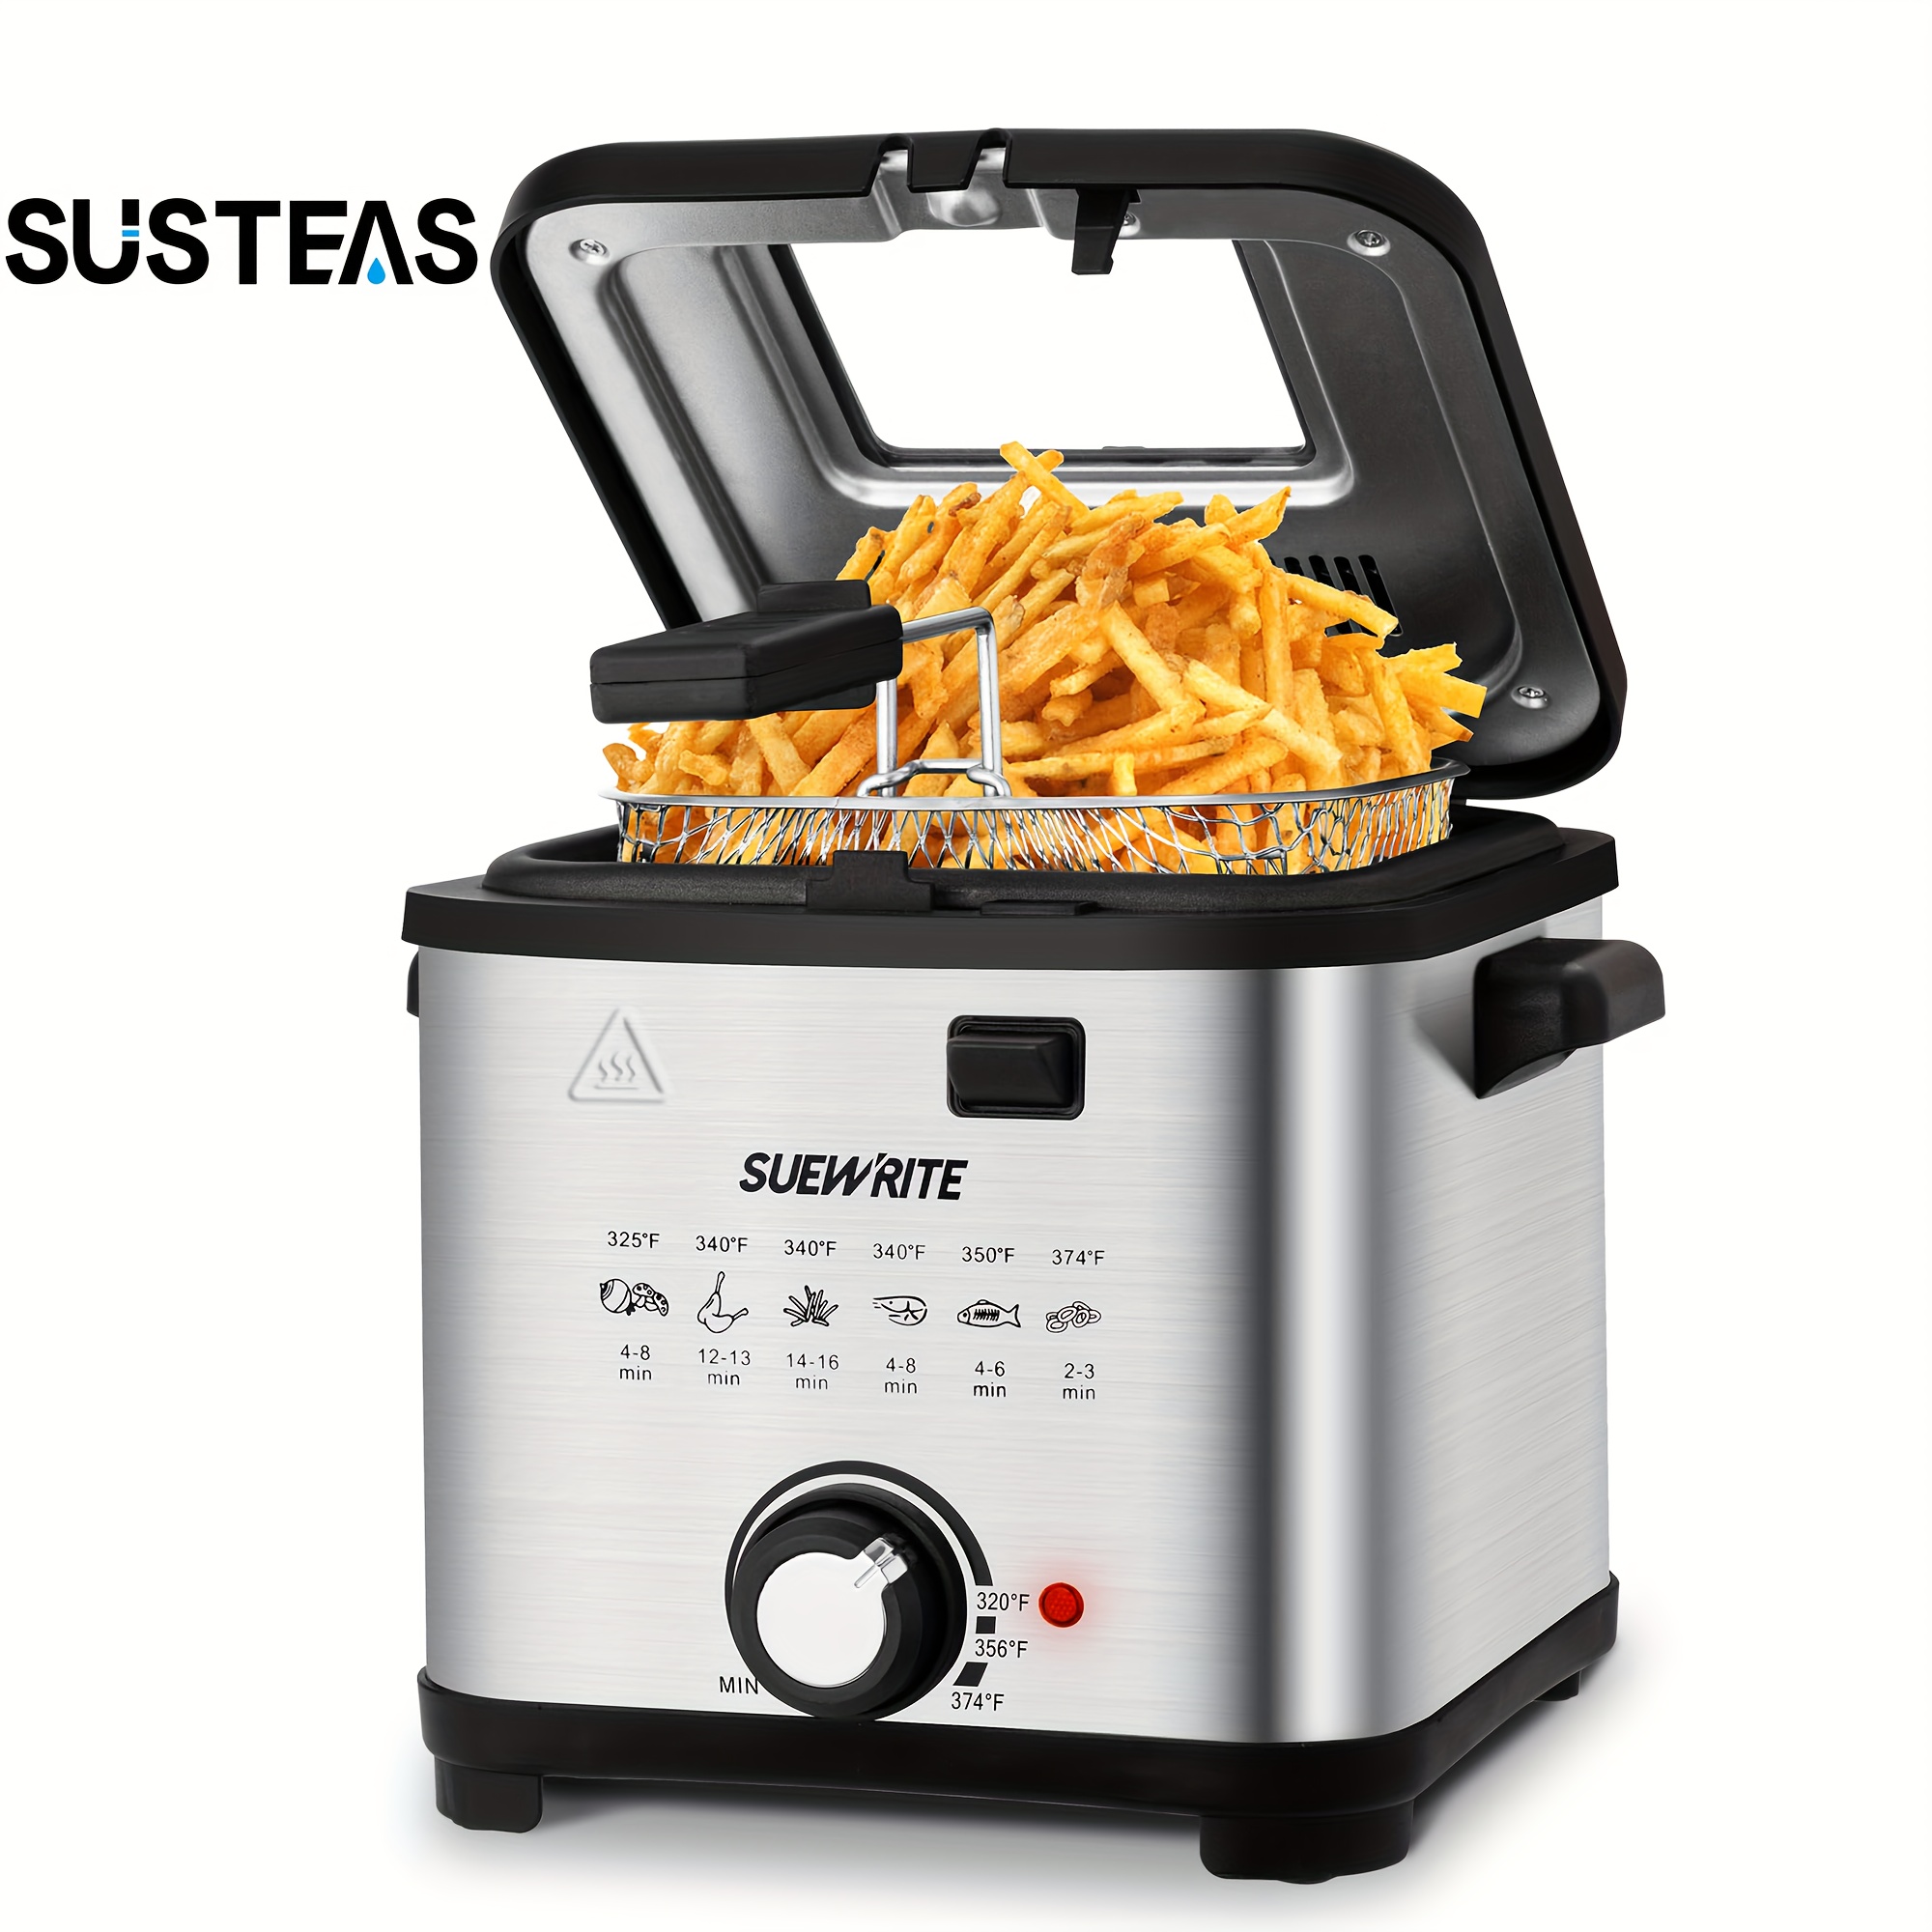 

Susteas Electric Deep Fryer, 1.5 Liters/1.6 Qt. Oil Capacity, Small Deep Fryer With Basket For Home Use, Cool Touch Sides Easy To Clean, Nonstick Basket